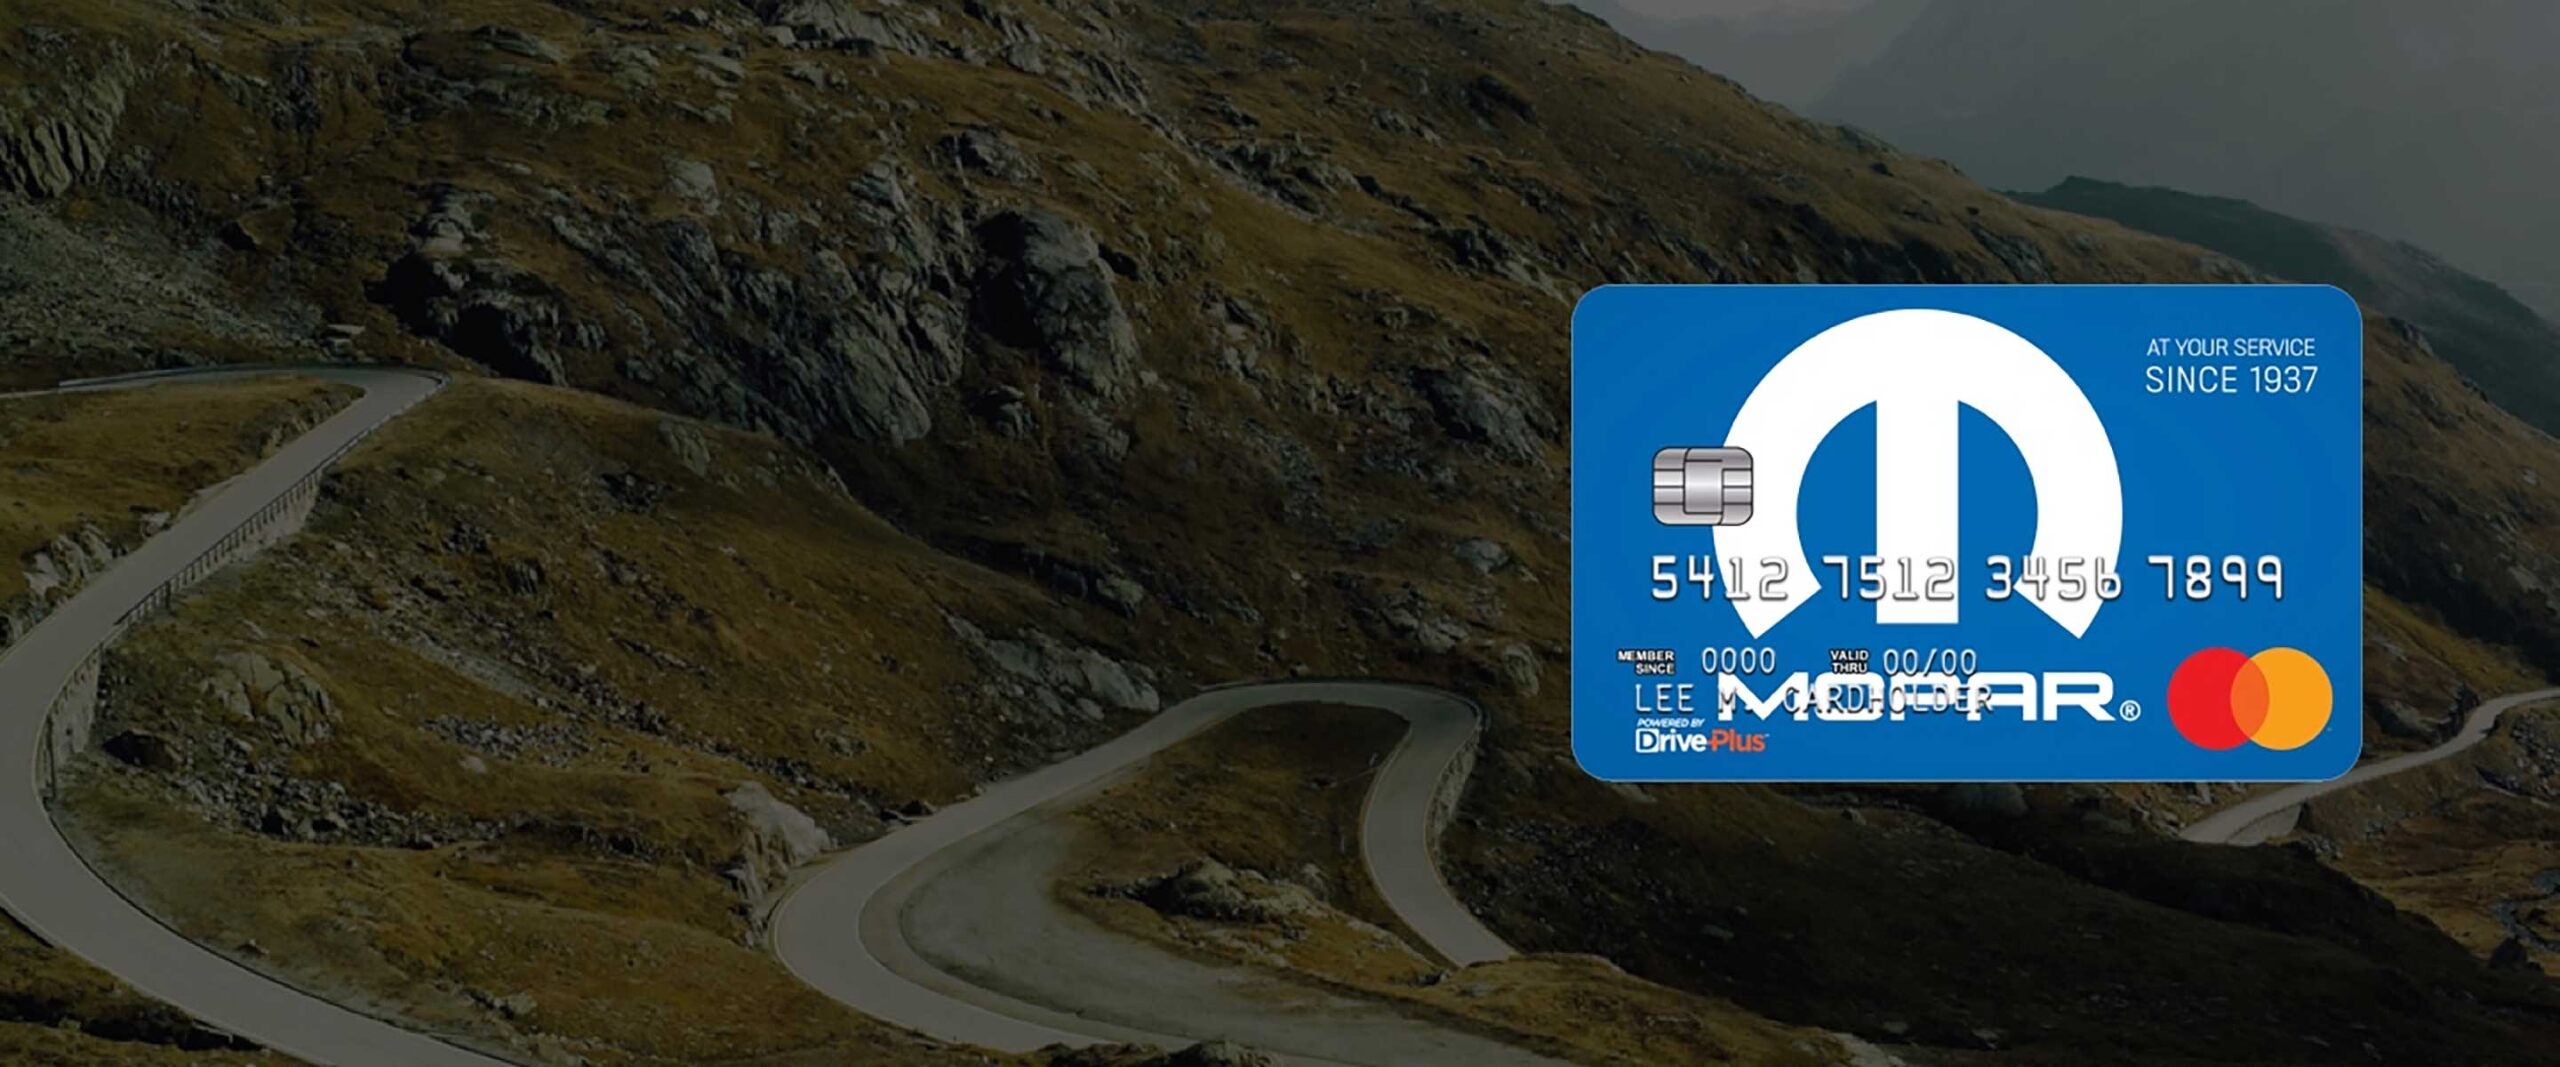 Mopar-branded Mastercard superimposed on a vista of a winding mountain road.